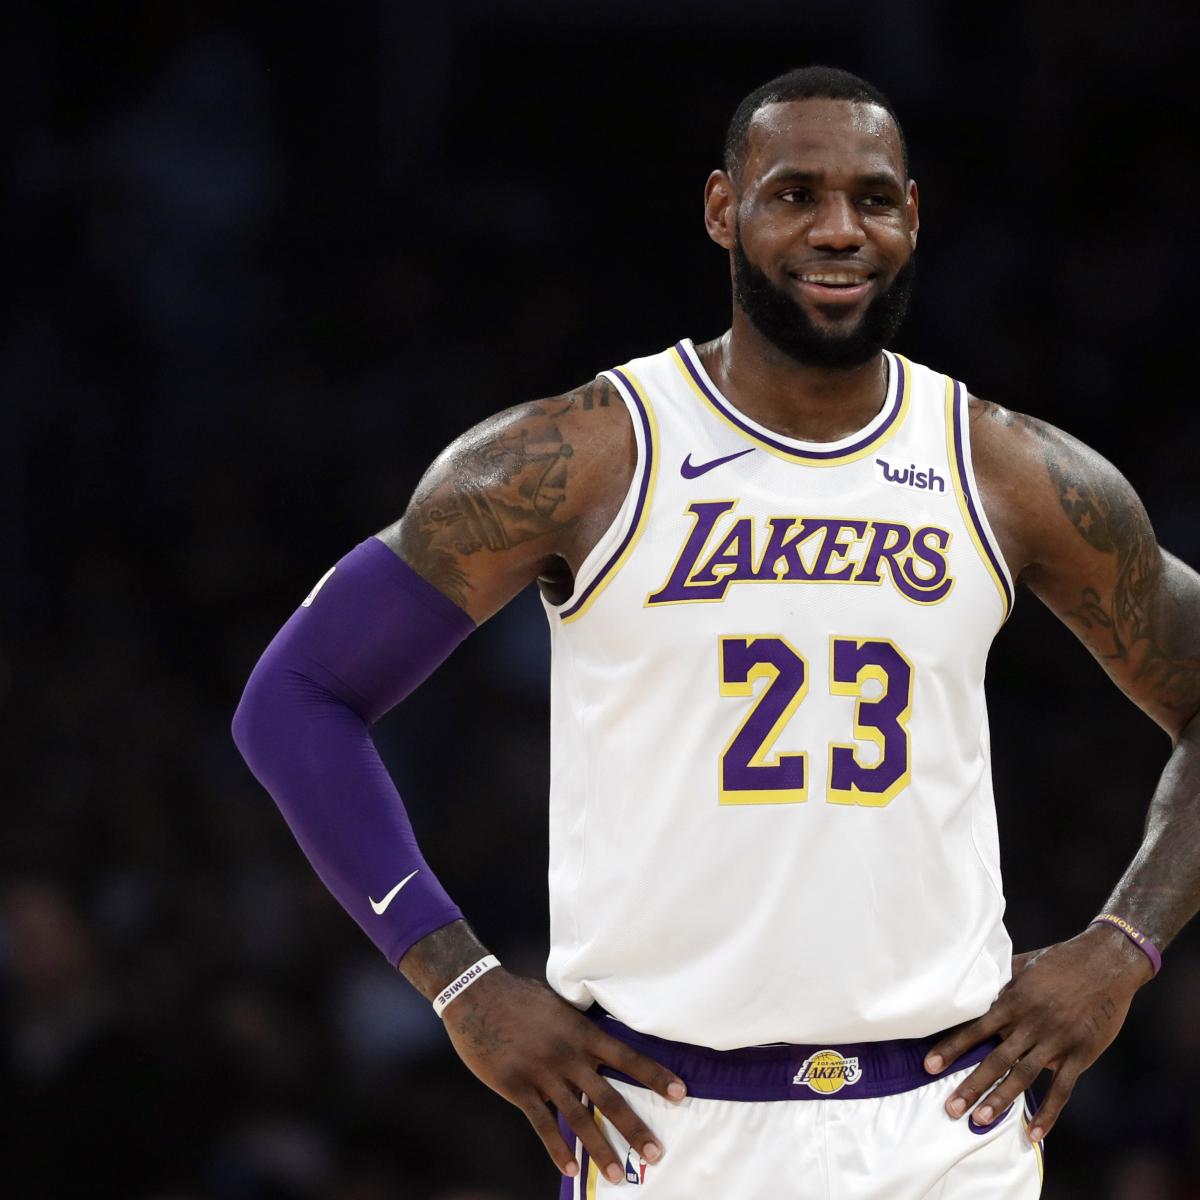 Lebron James Stephen Curry And More Speak On Lakers Vs Warriors On Christmas Bleacher Report Latest News Videos And Highlights